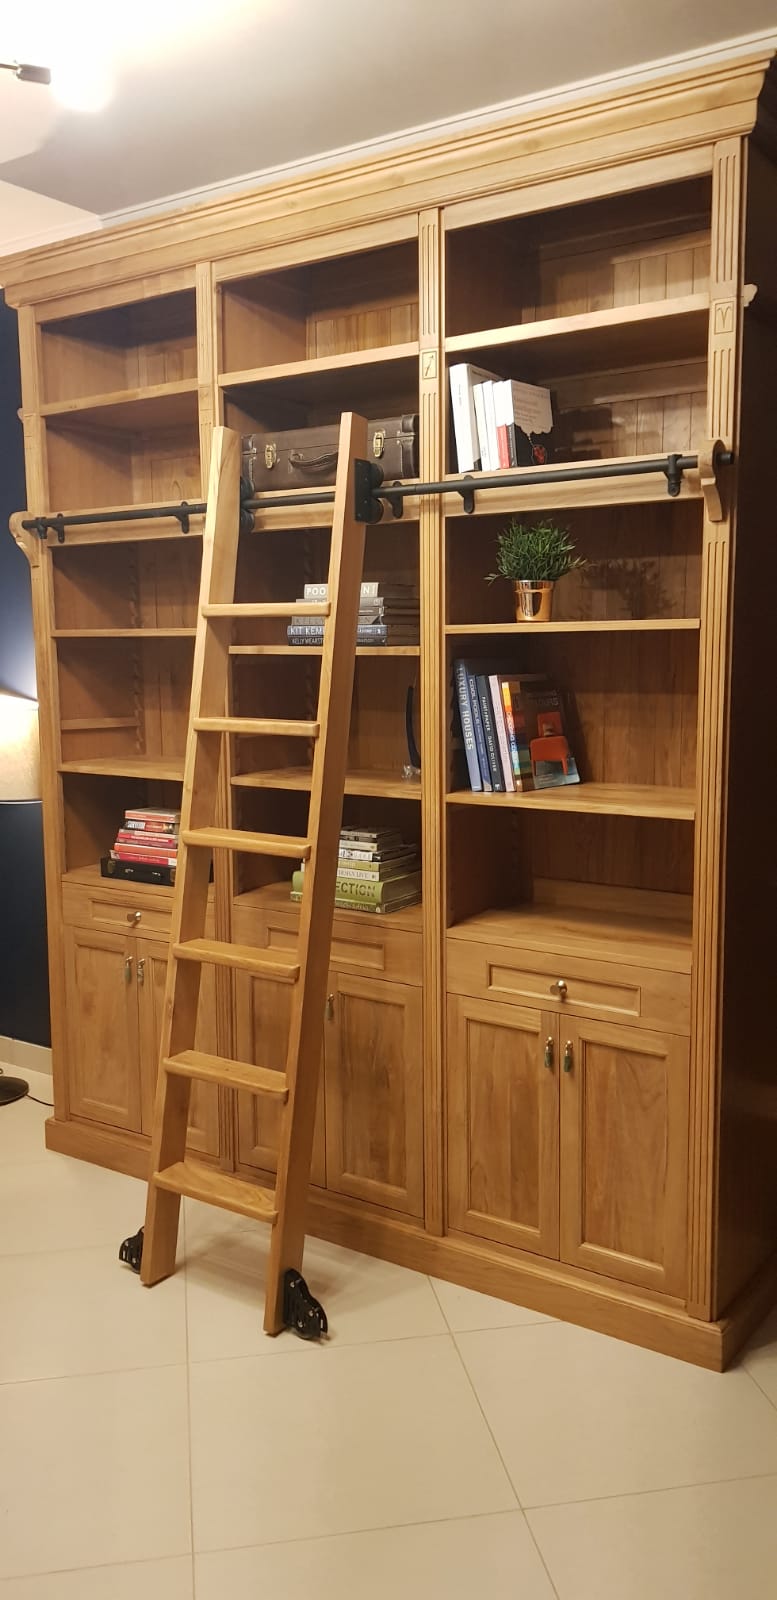 Flat packed furniture - book case assembled and installed